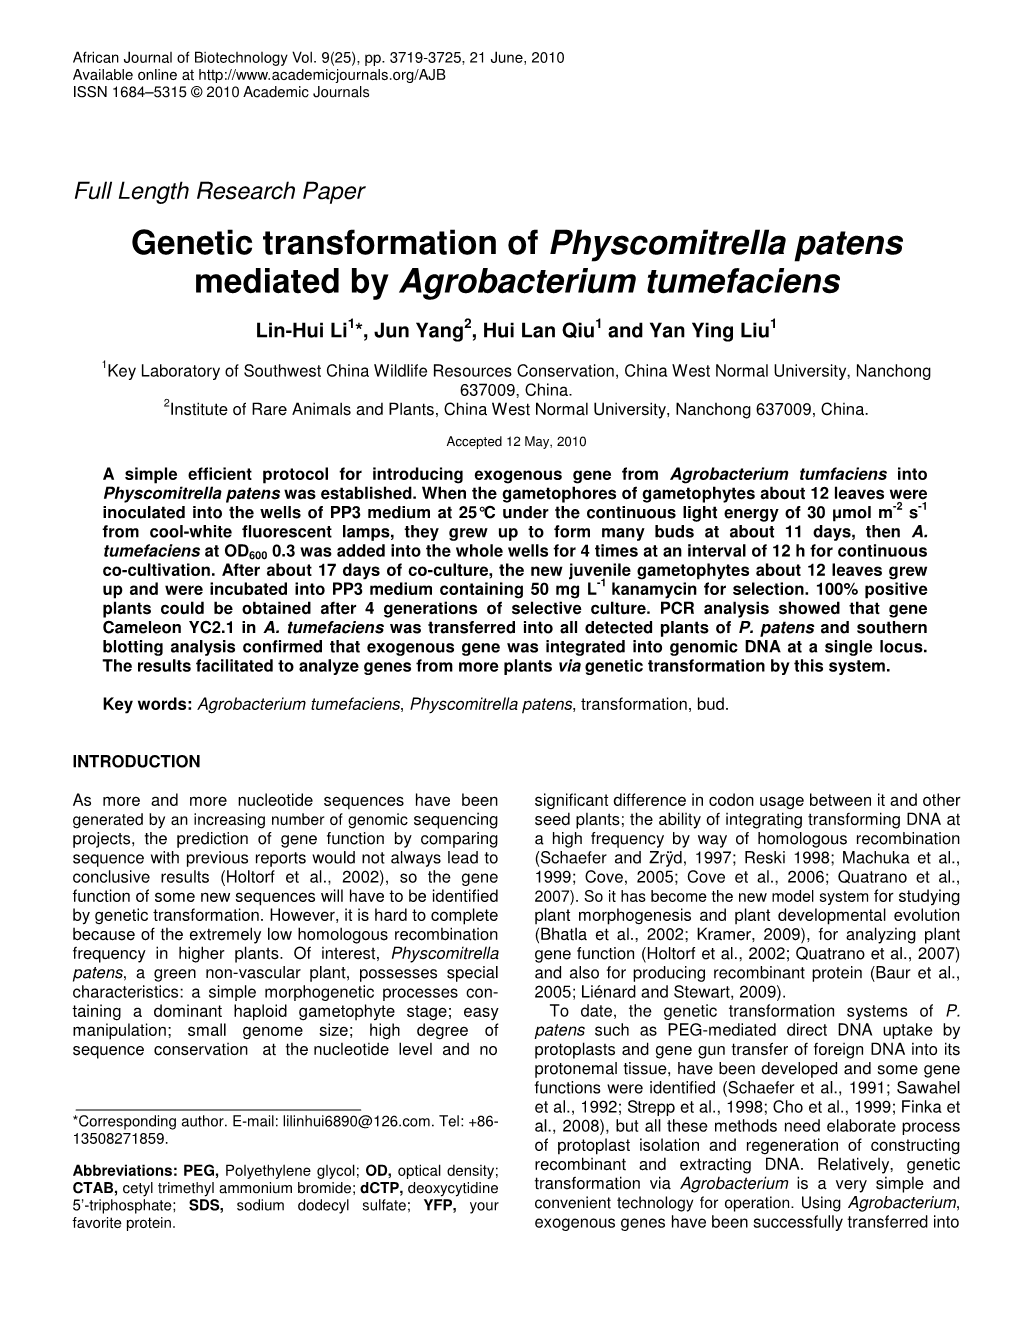 Genetic Transformation of Physcomitrella Patens Mediated by Agrobacterium Tumefaciens